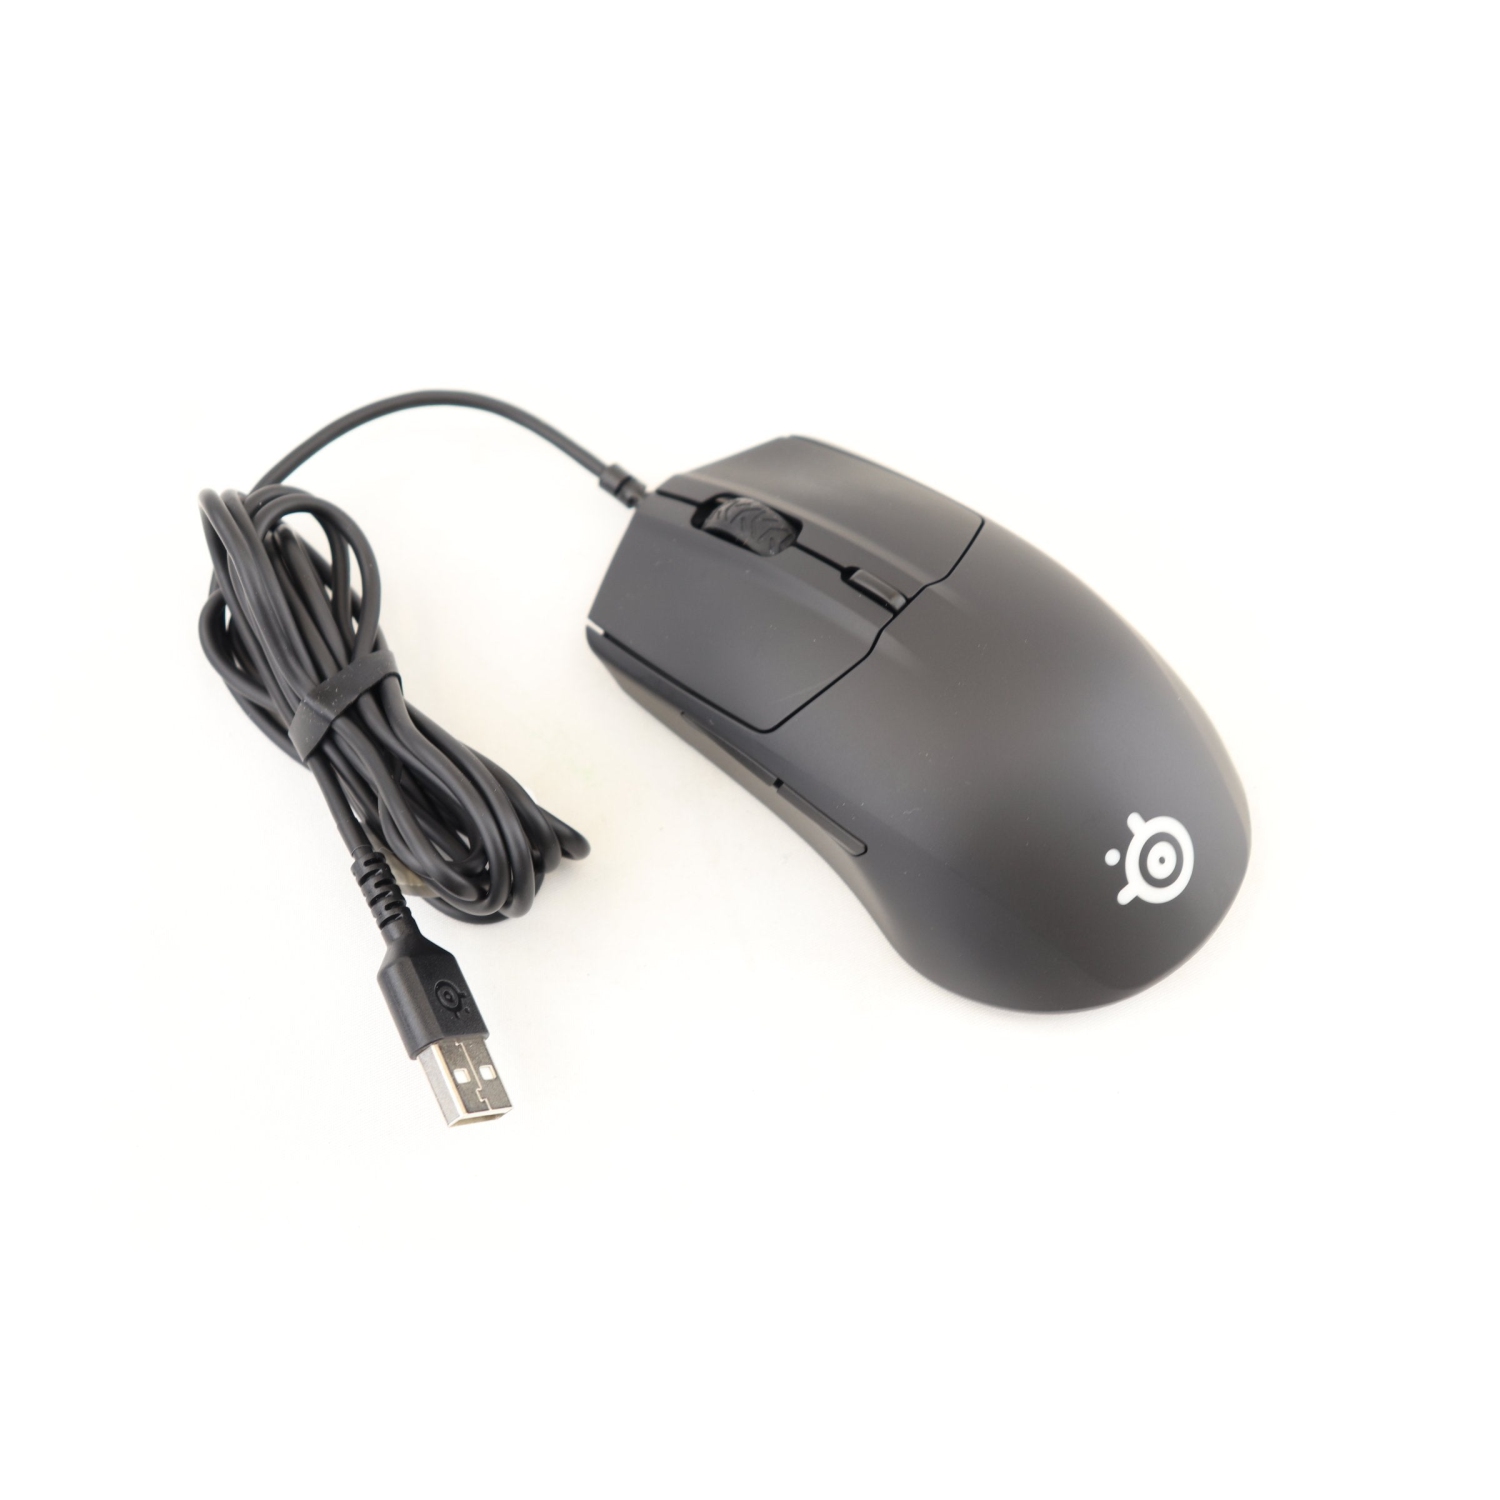 Open Box - Steelseries Rival 3 8500 DPI Optical Gaming Mouse Black